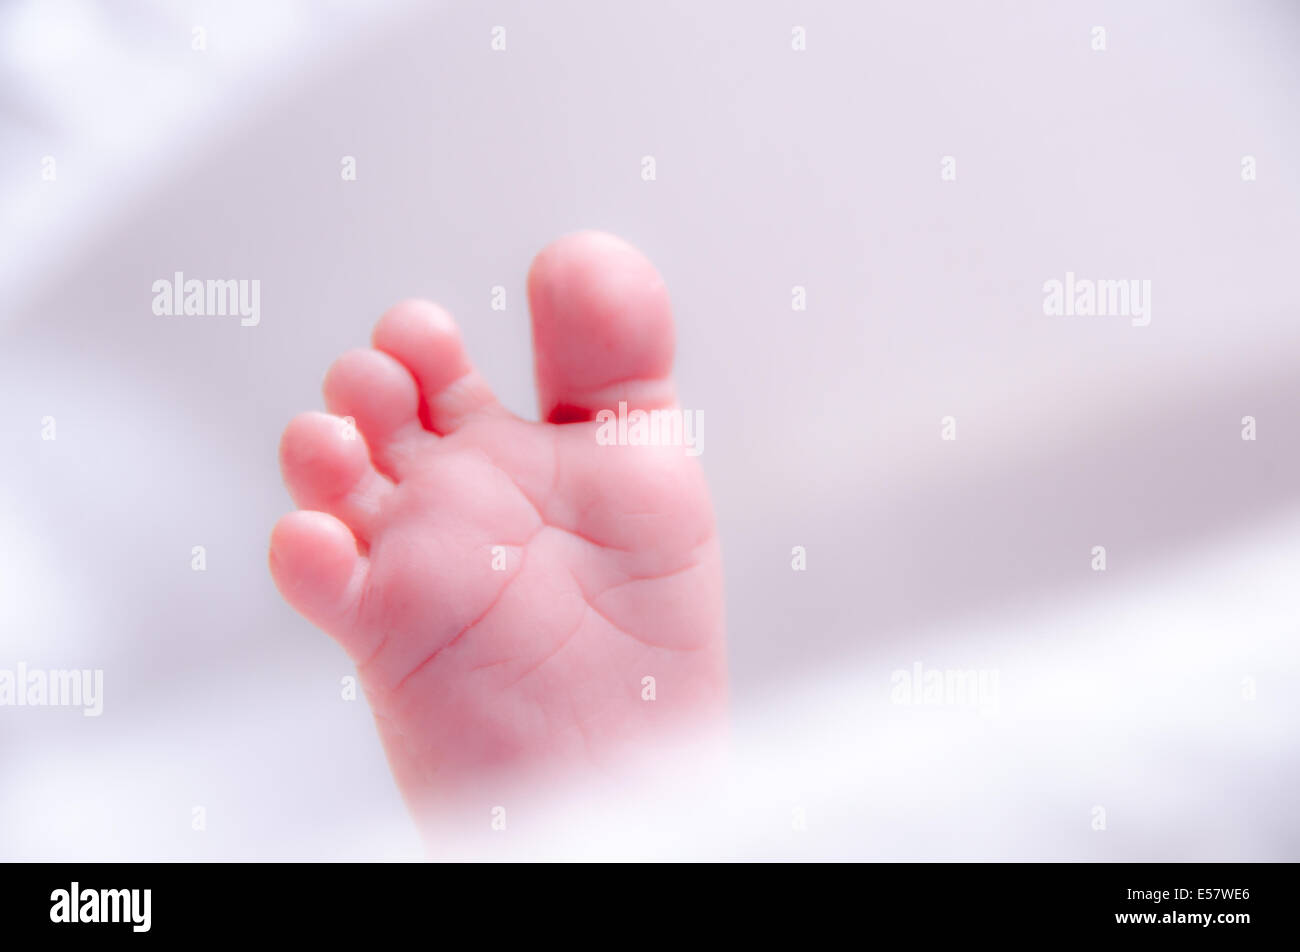 Newborn baby stretching out in a light and airy nursery moses basket Stock Photo